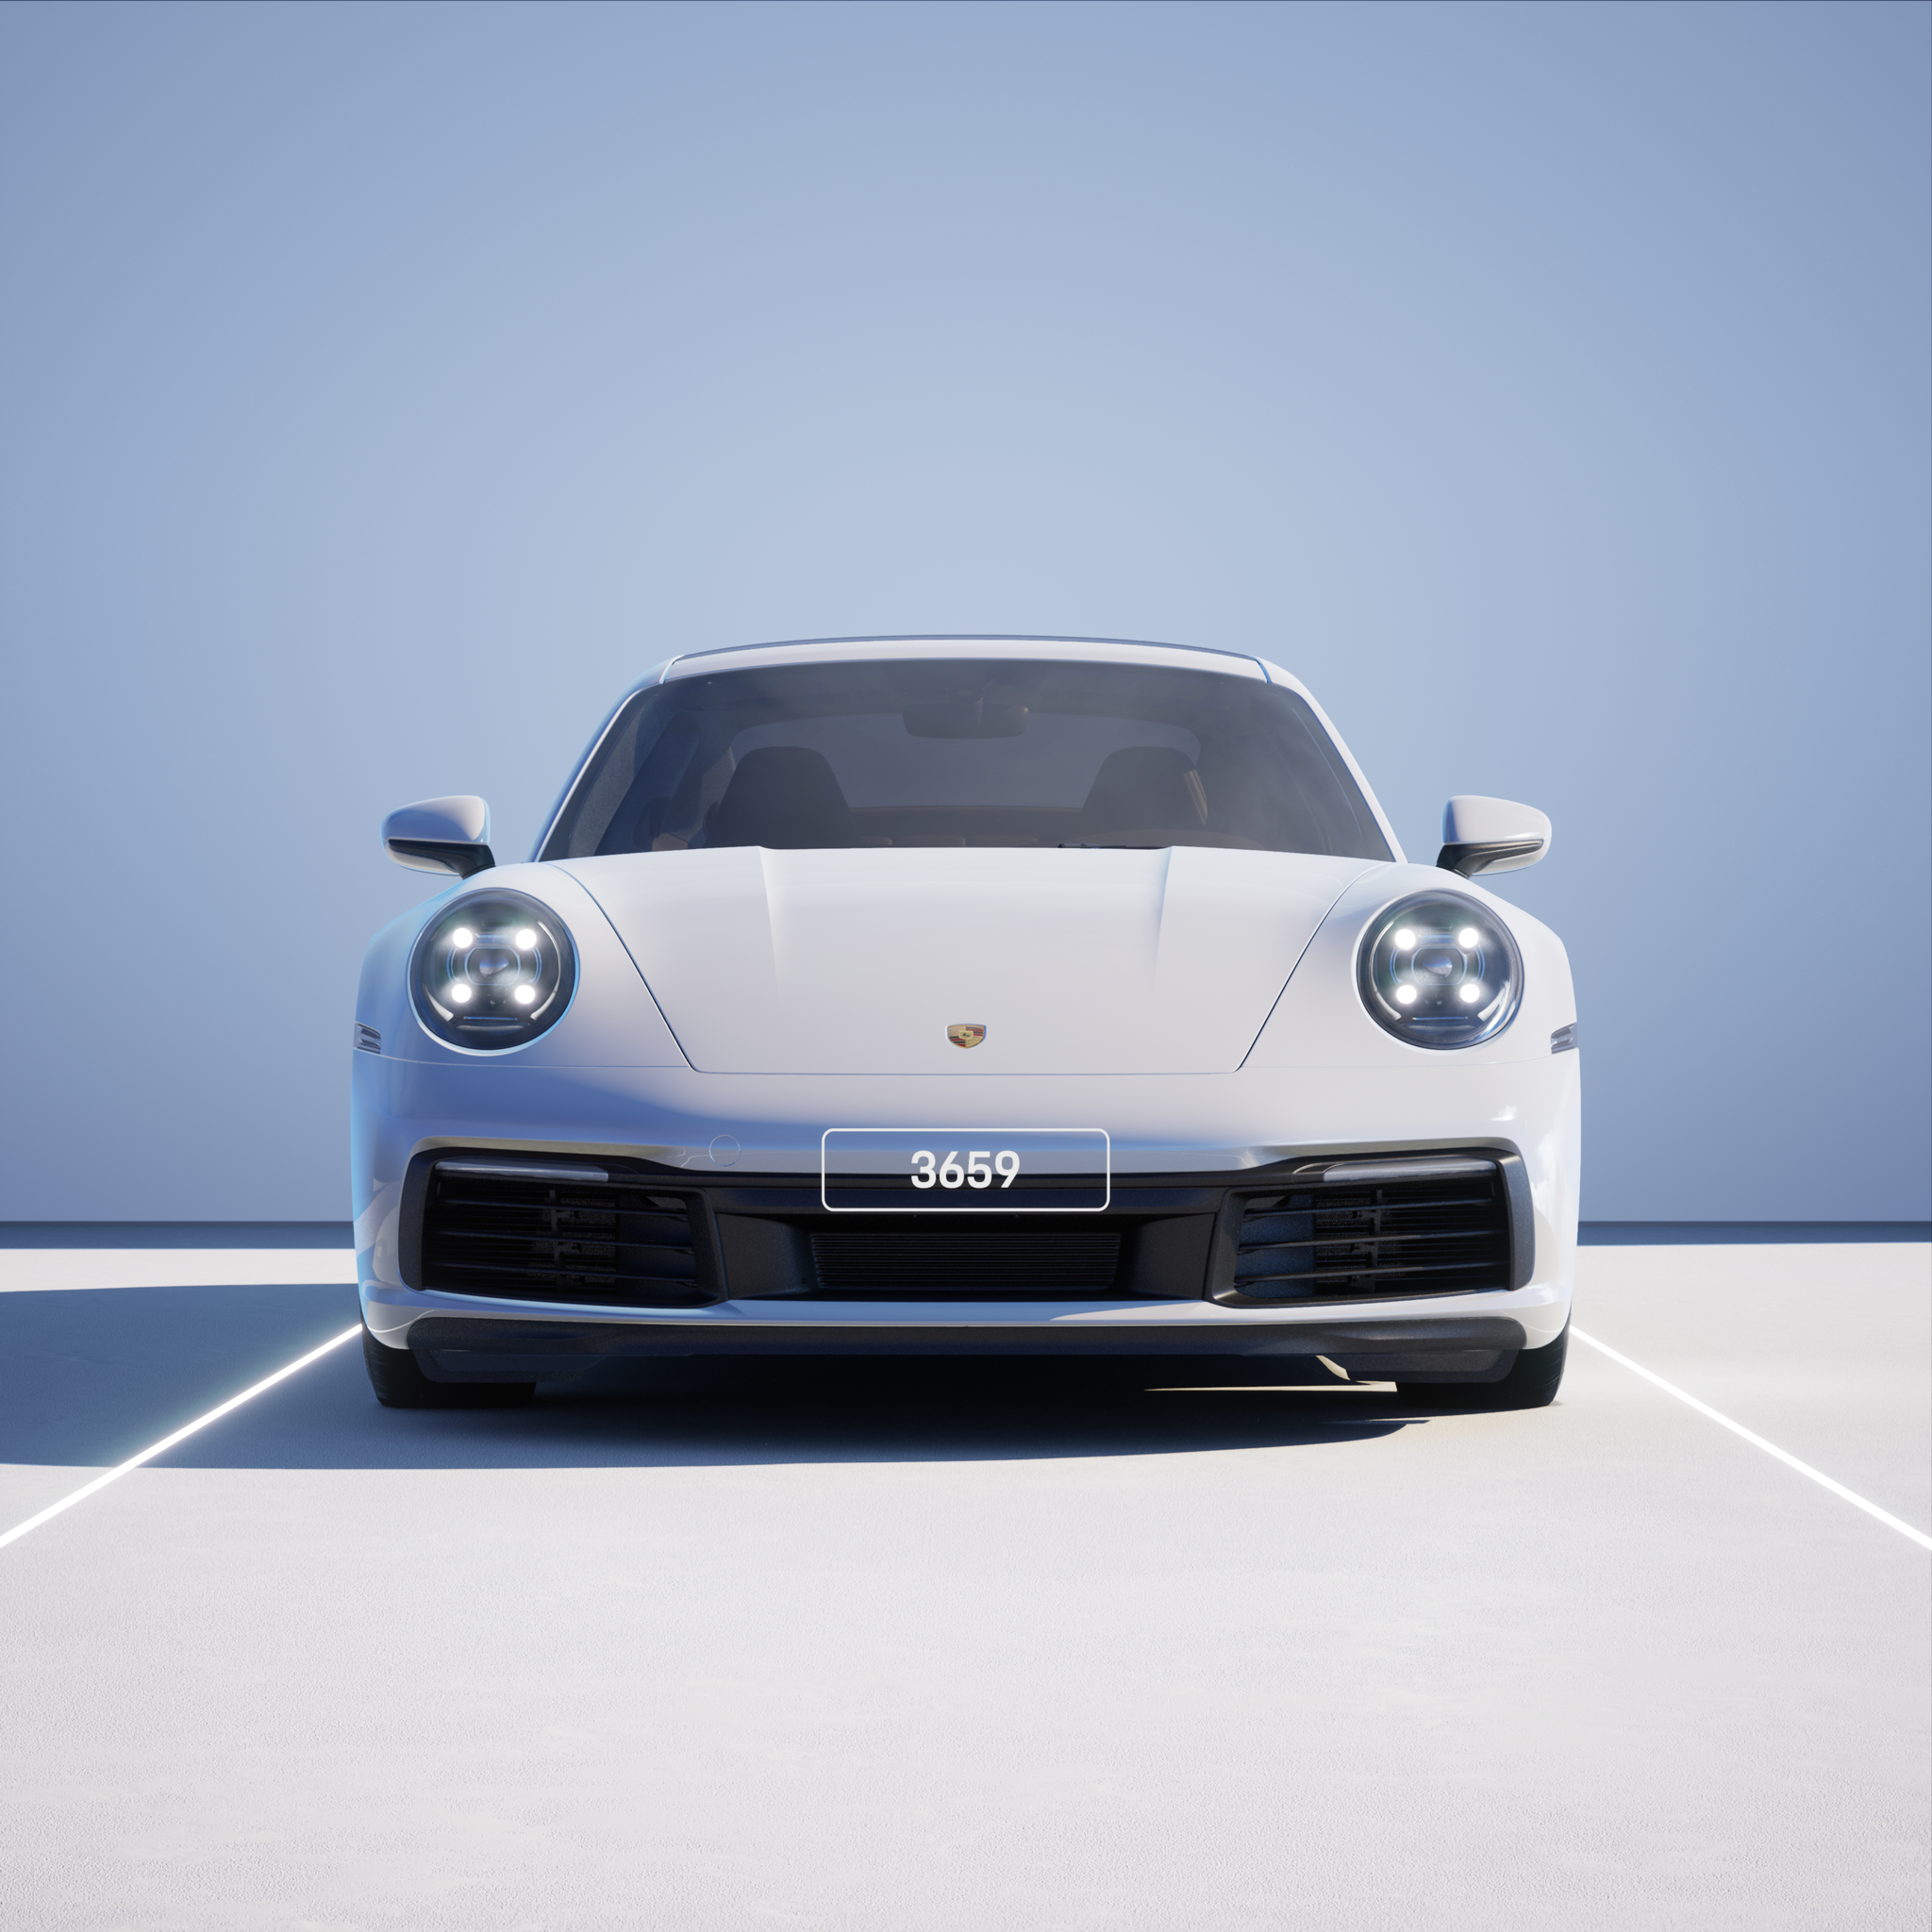 The PORSCHΞ 911 3659 image in phase